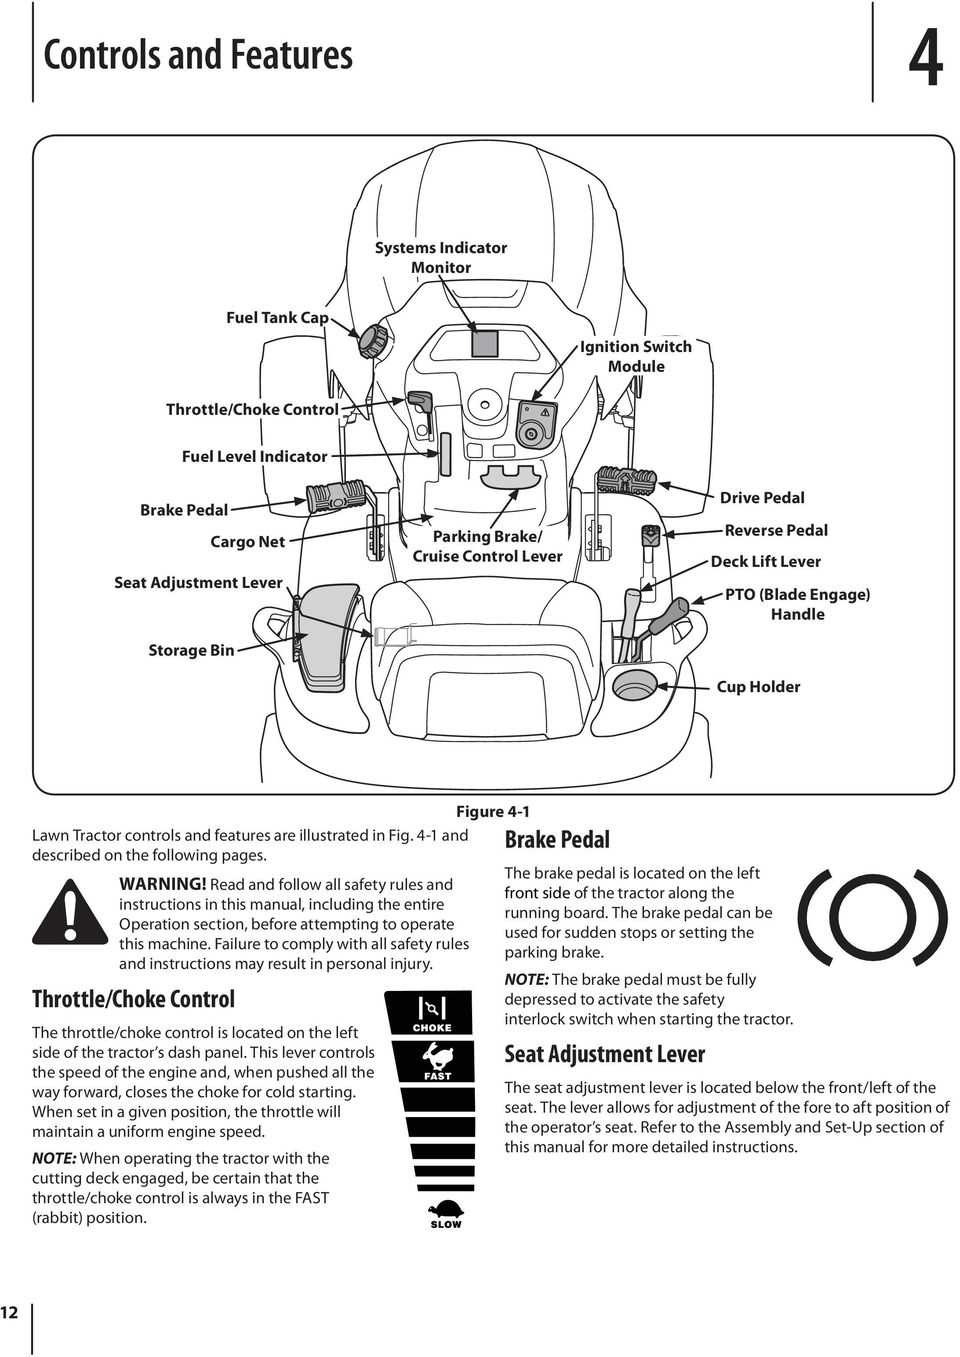 4-1 and described on the following pages. WARNING! Read and follow all safety rules and instructions in this manual, including the entire Operation section, before attempting to operate this machine.